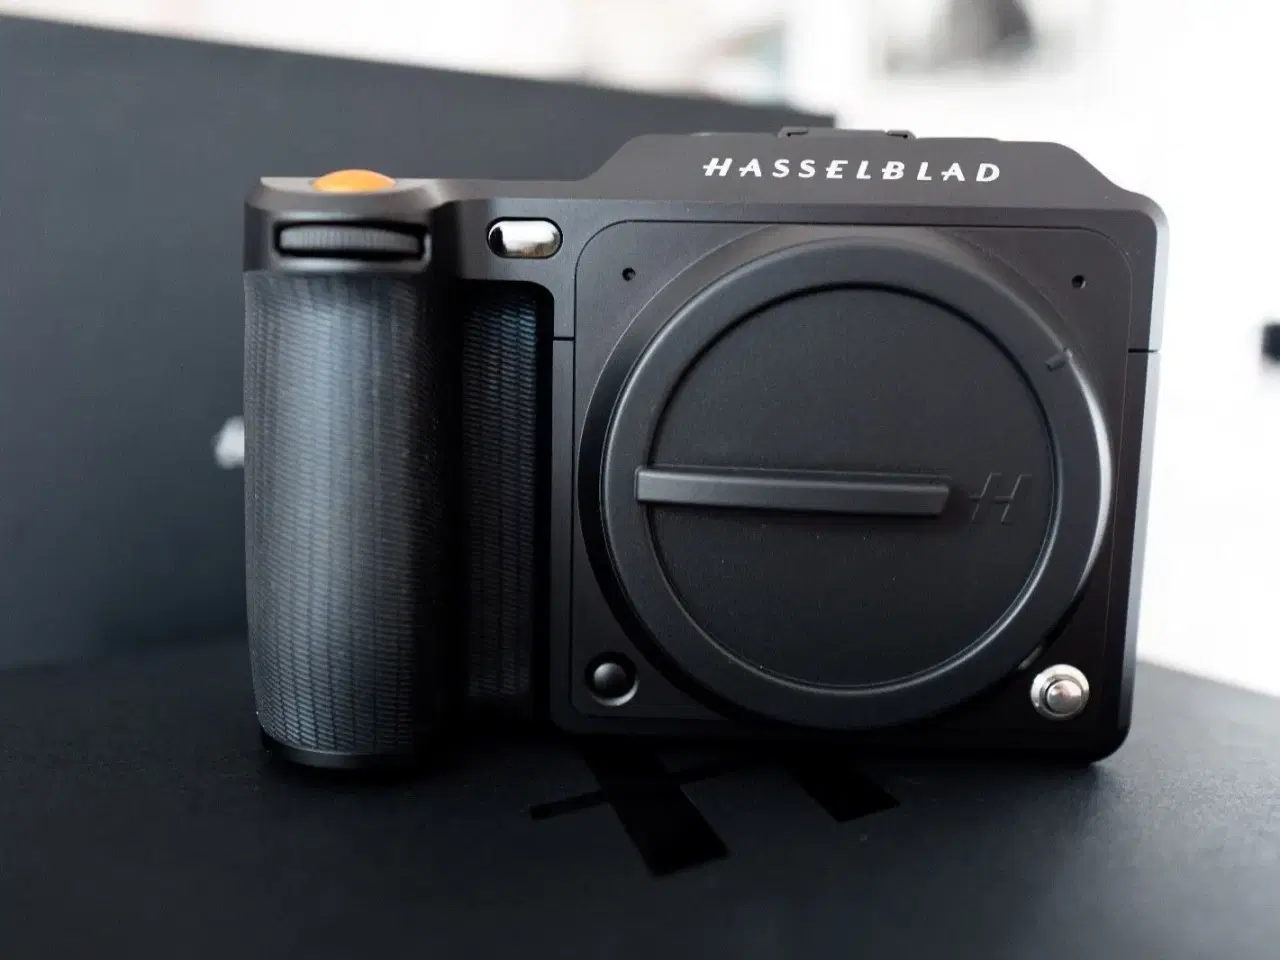 Billede 1 - Hasselblad x1d-50 C 4116 LIMITED EDITION